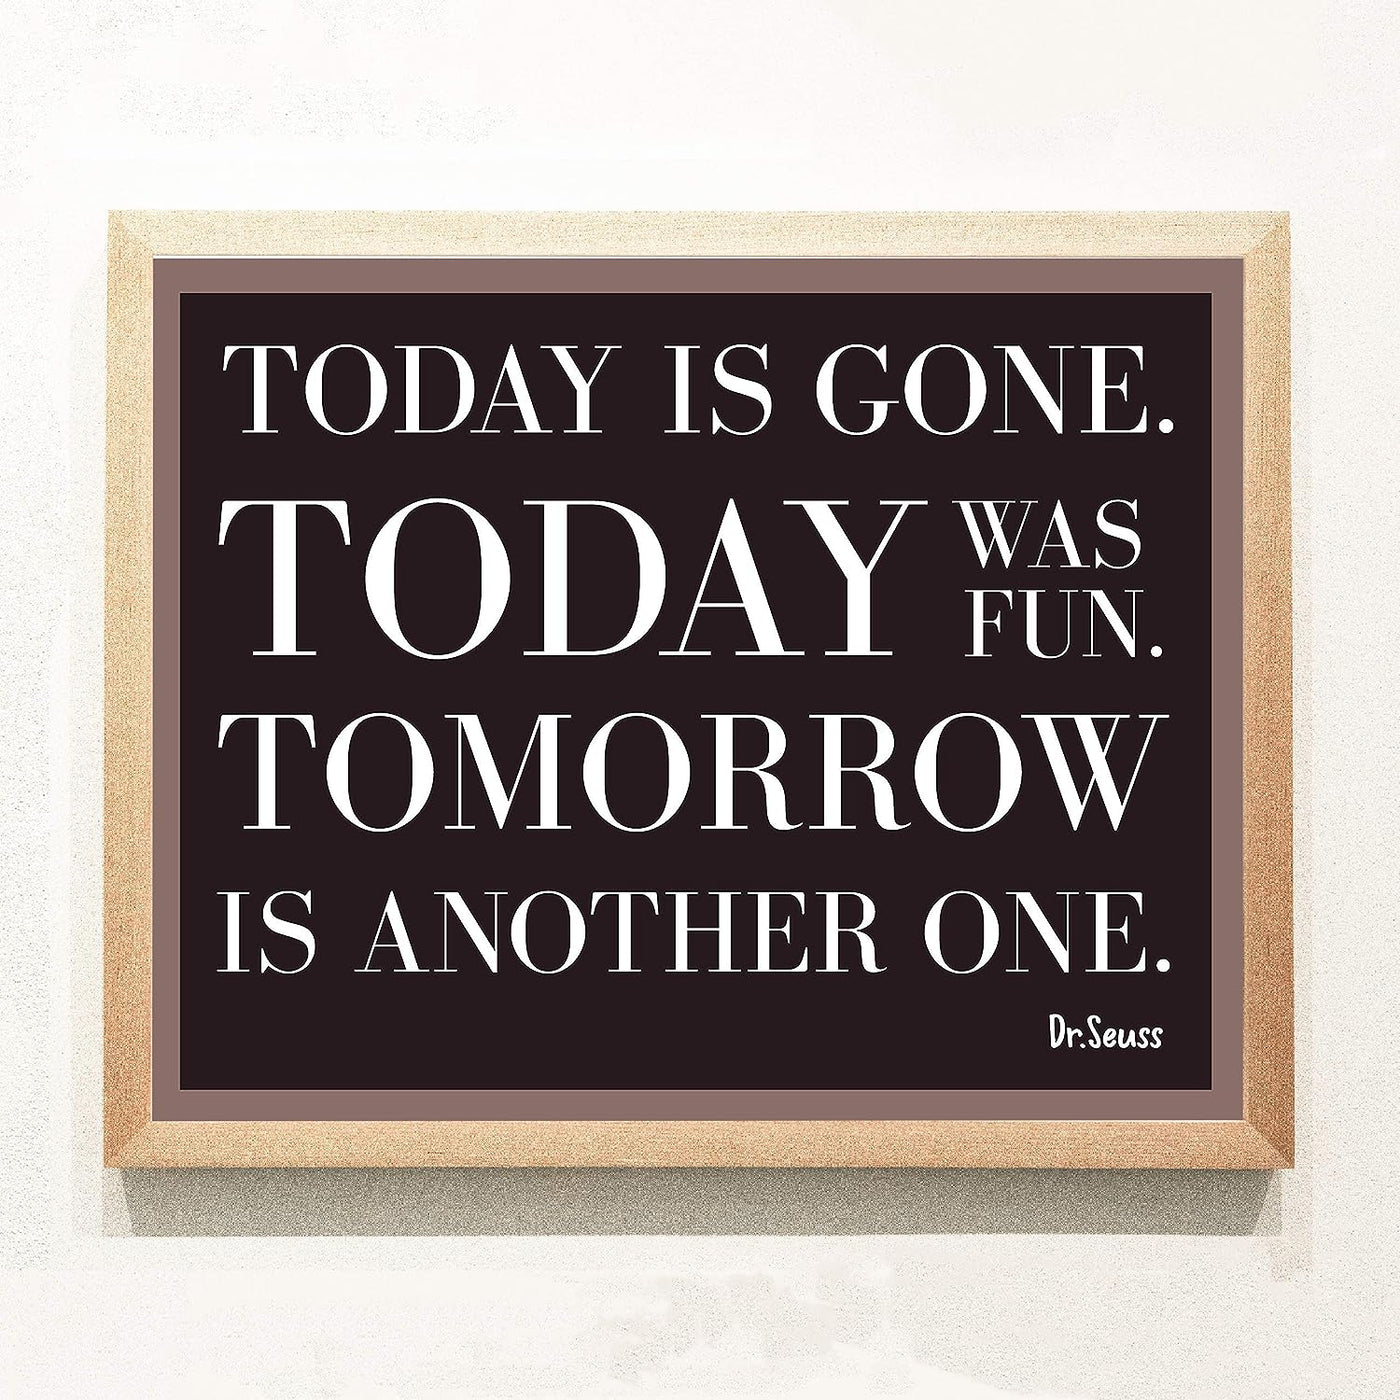 Today Is Gone-Today Was Fun-Dr. Seuss Quote -14 x 11" Art Wall Print- Ready to Frame. Modern Typographic Design. Home-Nursery-Office-School-Library Decor. Perfect Gift for Parents and Teachers!